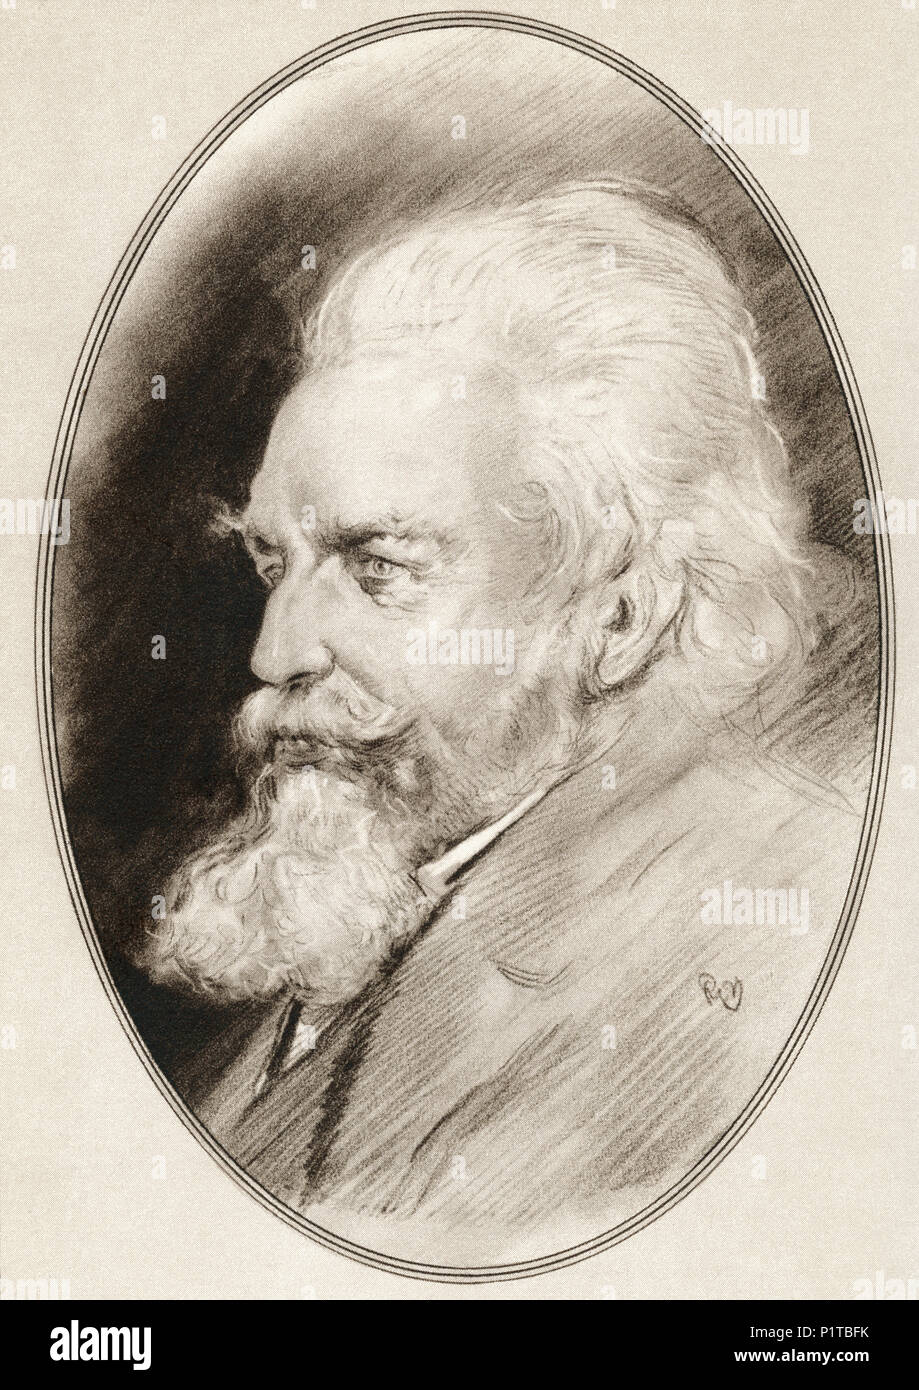 Ernst Heinrich Philipp August Haeckel, 1834 – 1919. German biologist, naturalist, philosopher, physician, professor, marine biologist, and artist.  Illustration by Gordon Ross, American artist and illustrator (1873-1946), from Living Biographies of Great Scientists. Stock Photo